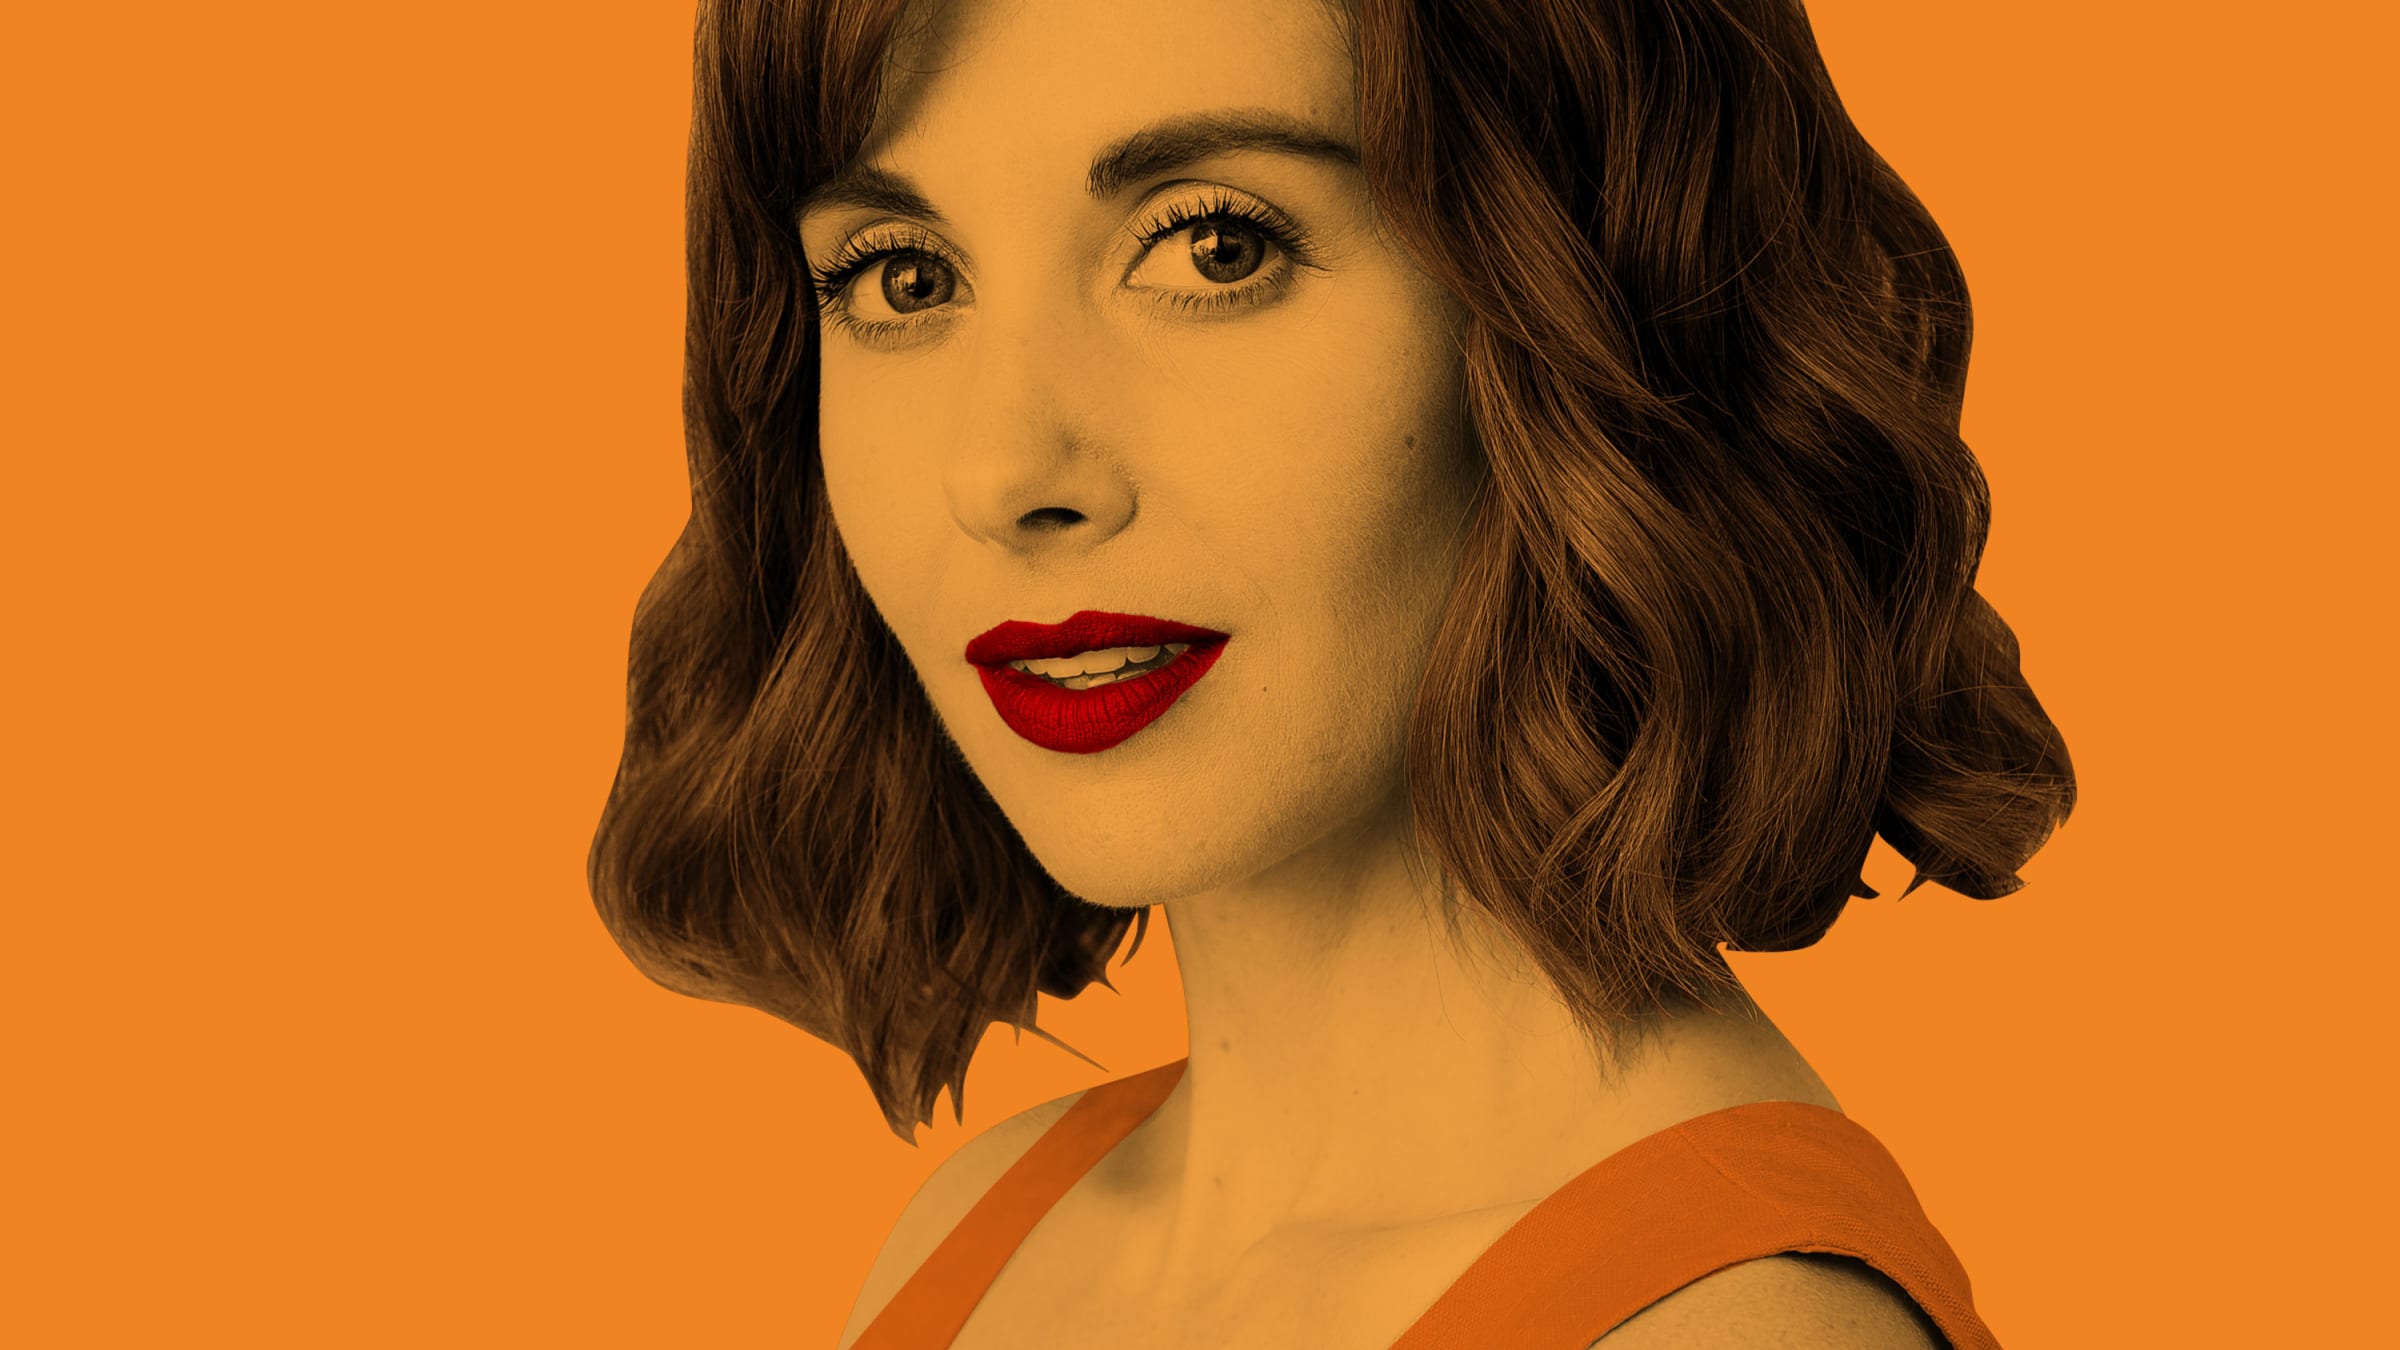 Alison Brie on Making Out With Aubrey Plaza and the Strange, Sad Death of GLOW